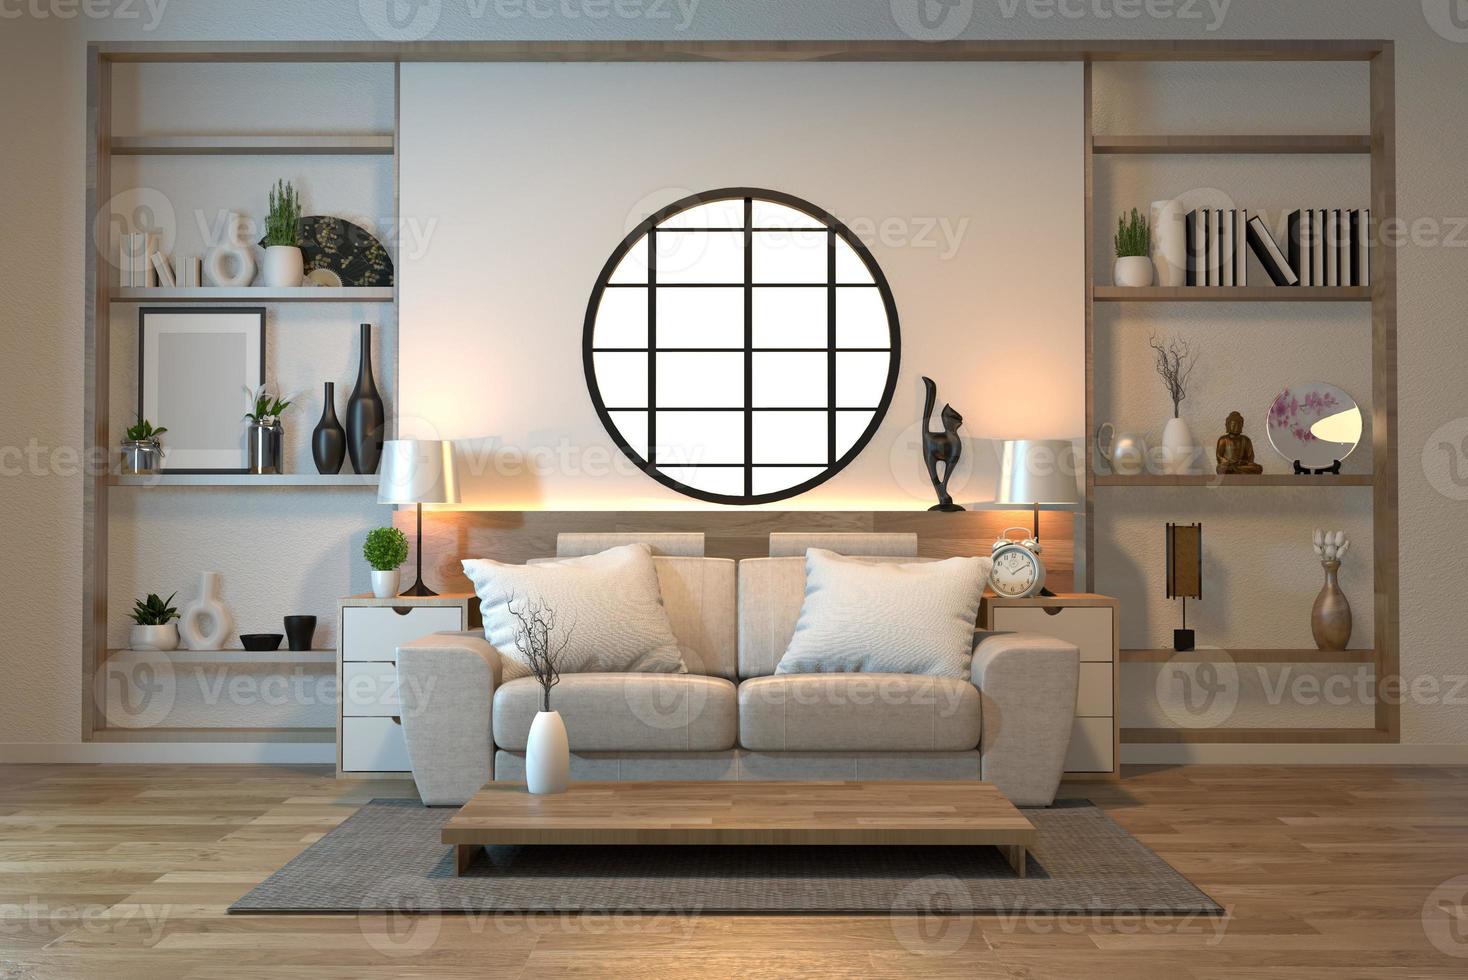 minimal interior design room zen style with sofa, arm chair, low table and decoration japan style design hidden light in shelf wall.3D rendering photo